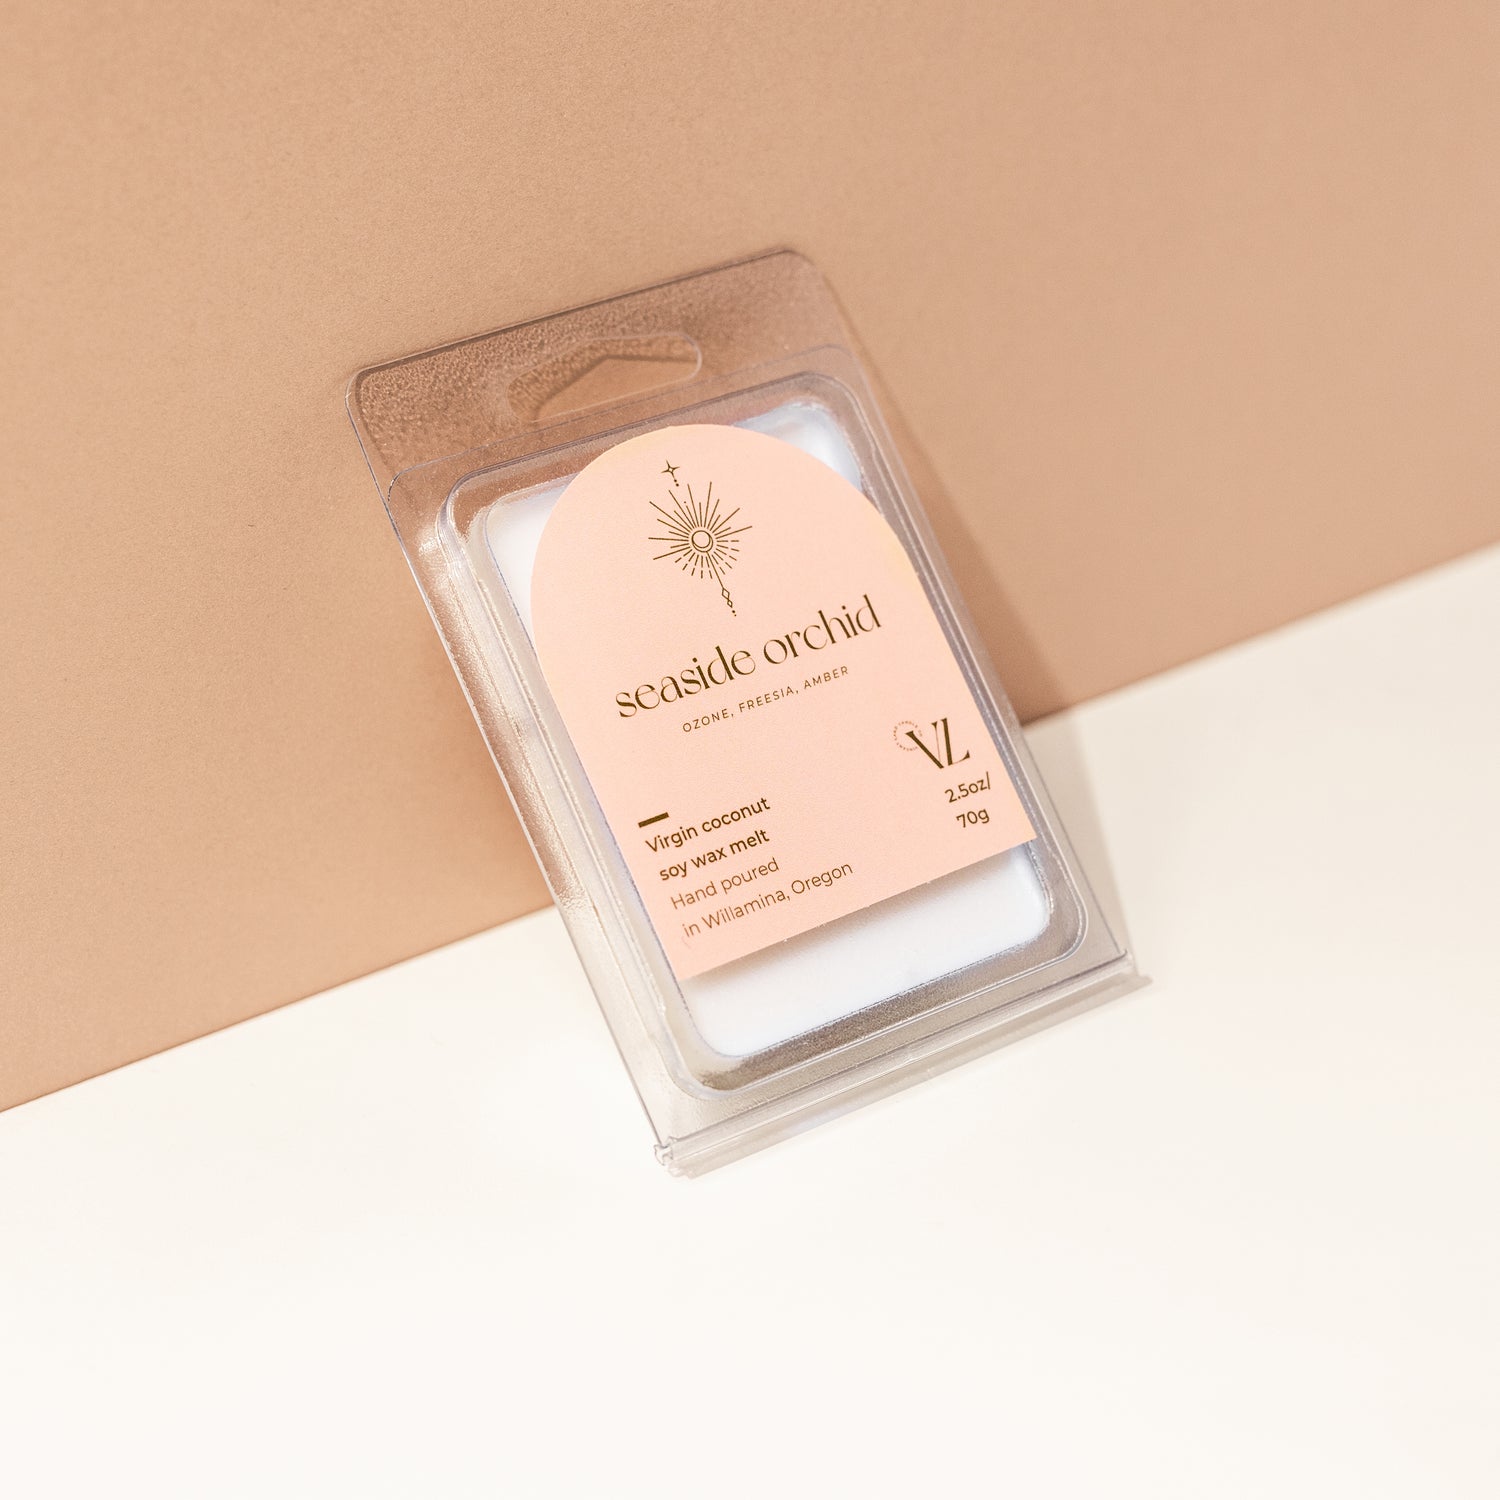 Coconut soy wax melts | Choose your scent - Vincent Land Candle Co.